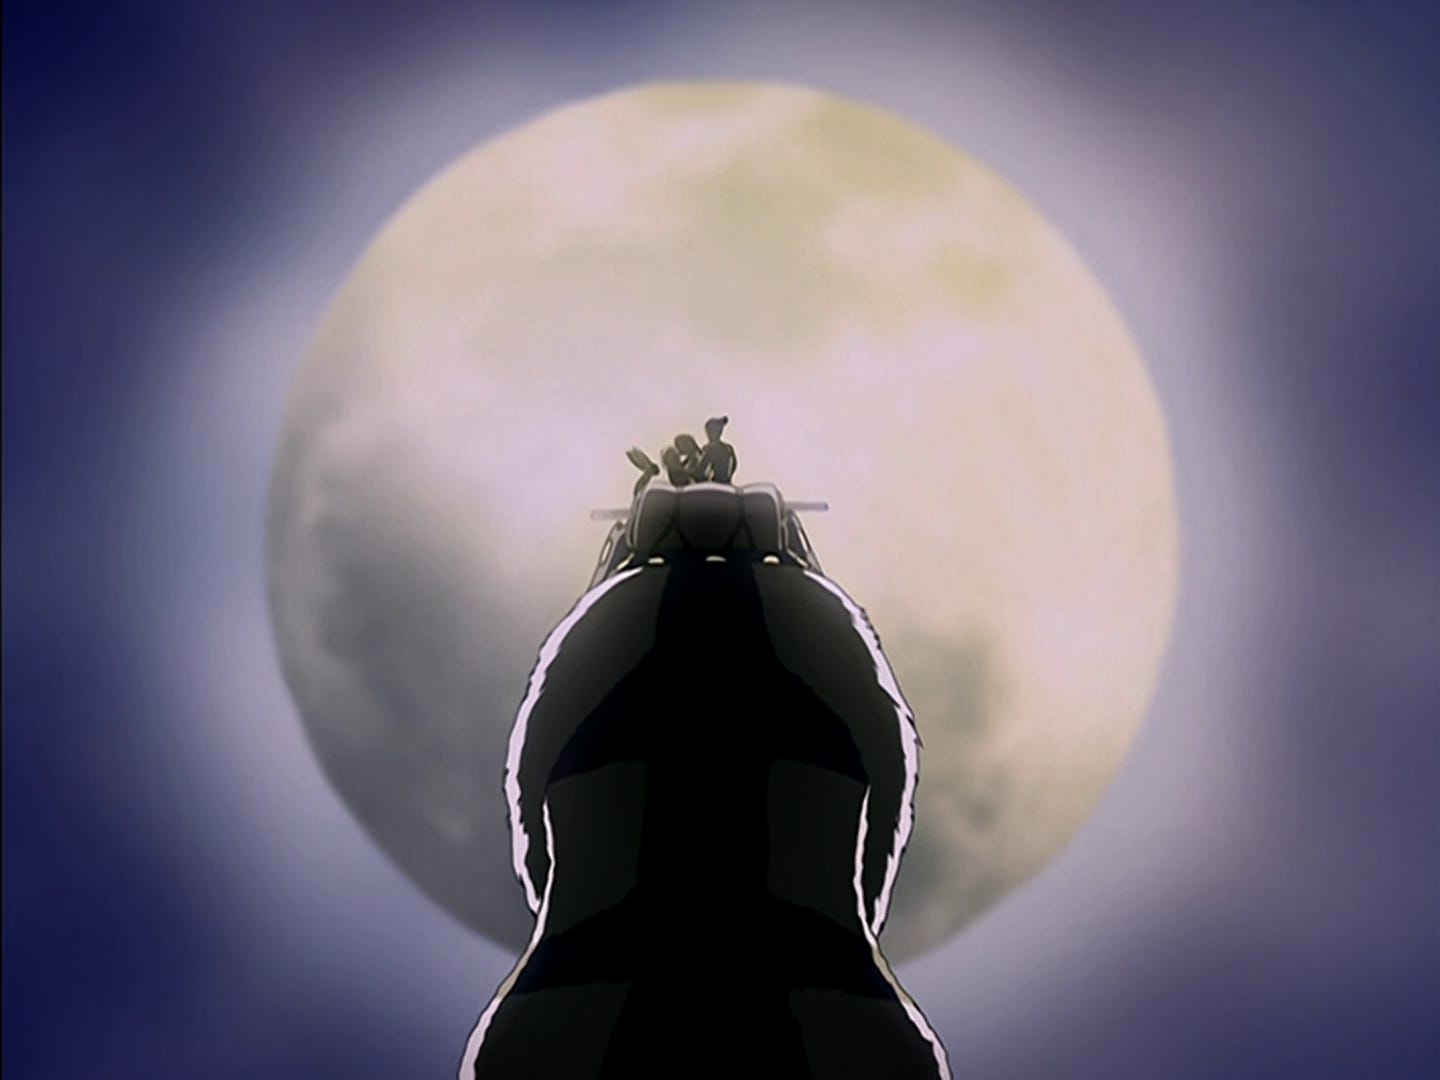 Silhouetted by the full moon, Sokka, Katara, and Momo comfort Aang, all riding atop Appa.